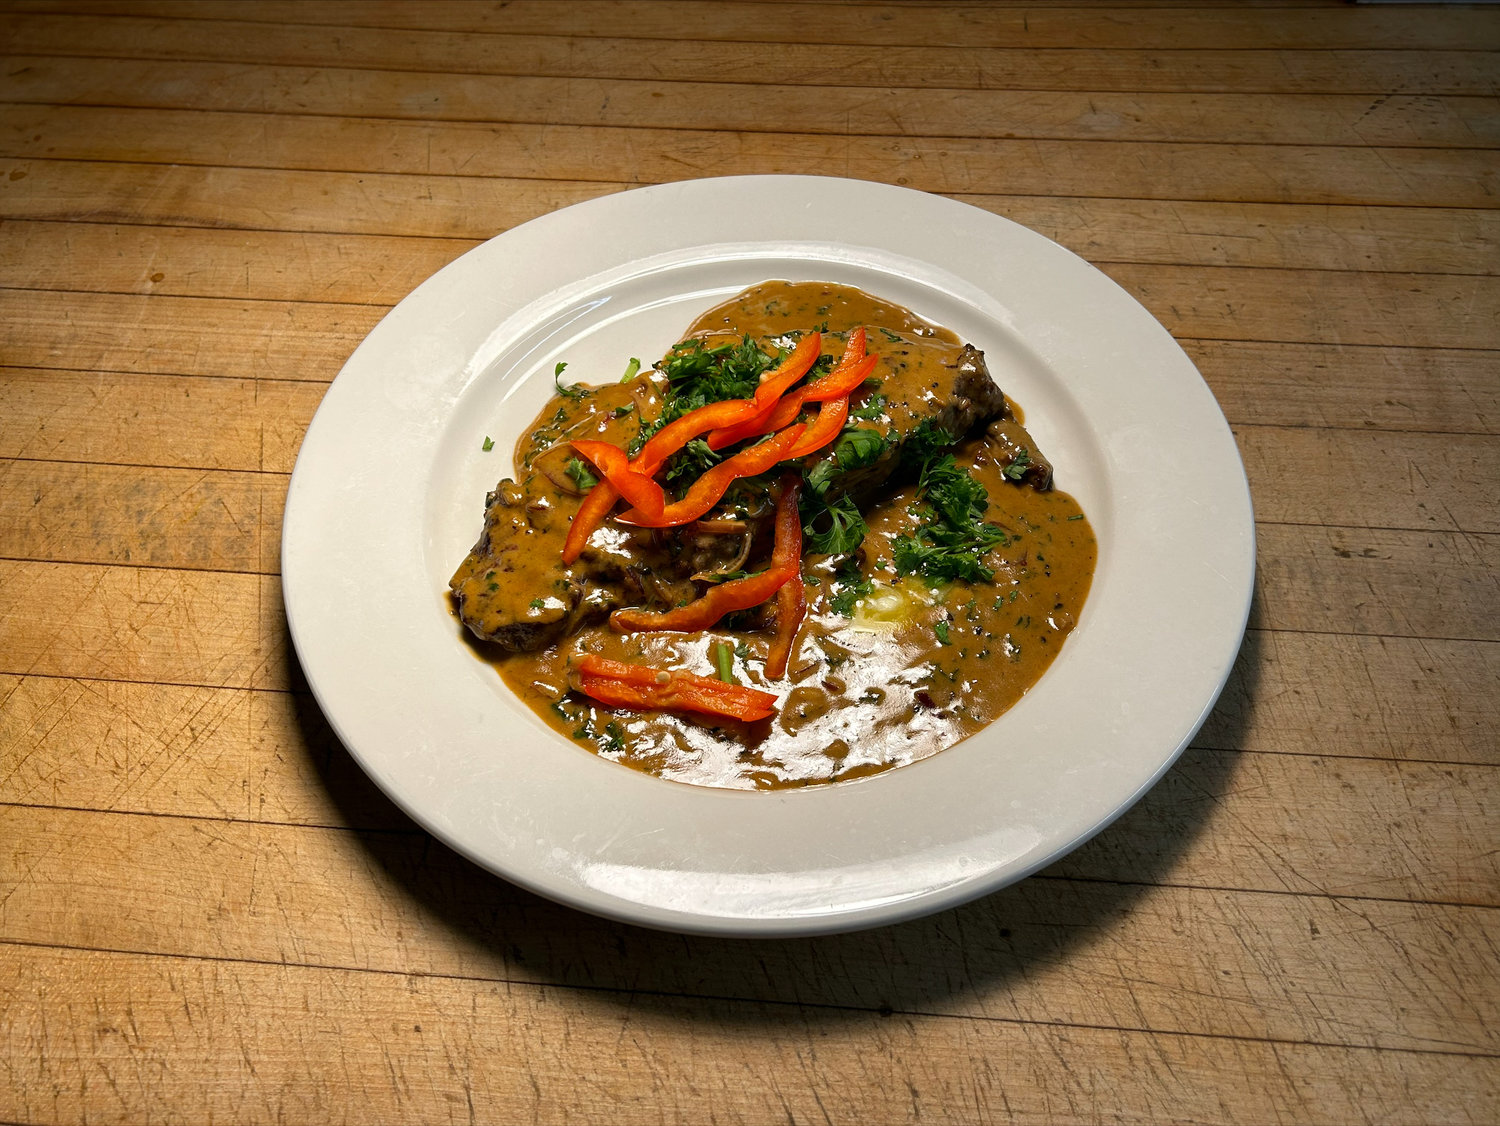 Steak Diane, prepared by Chef Lon Kivell at The Andes Hotel.